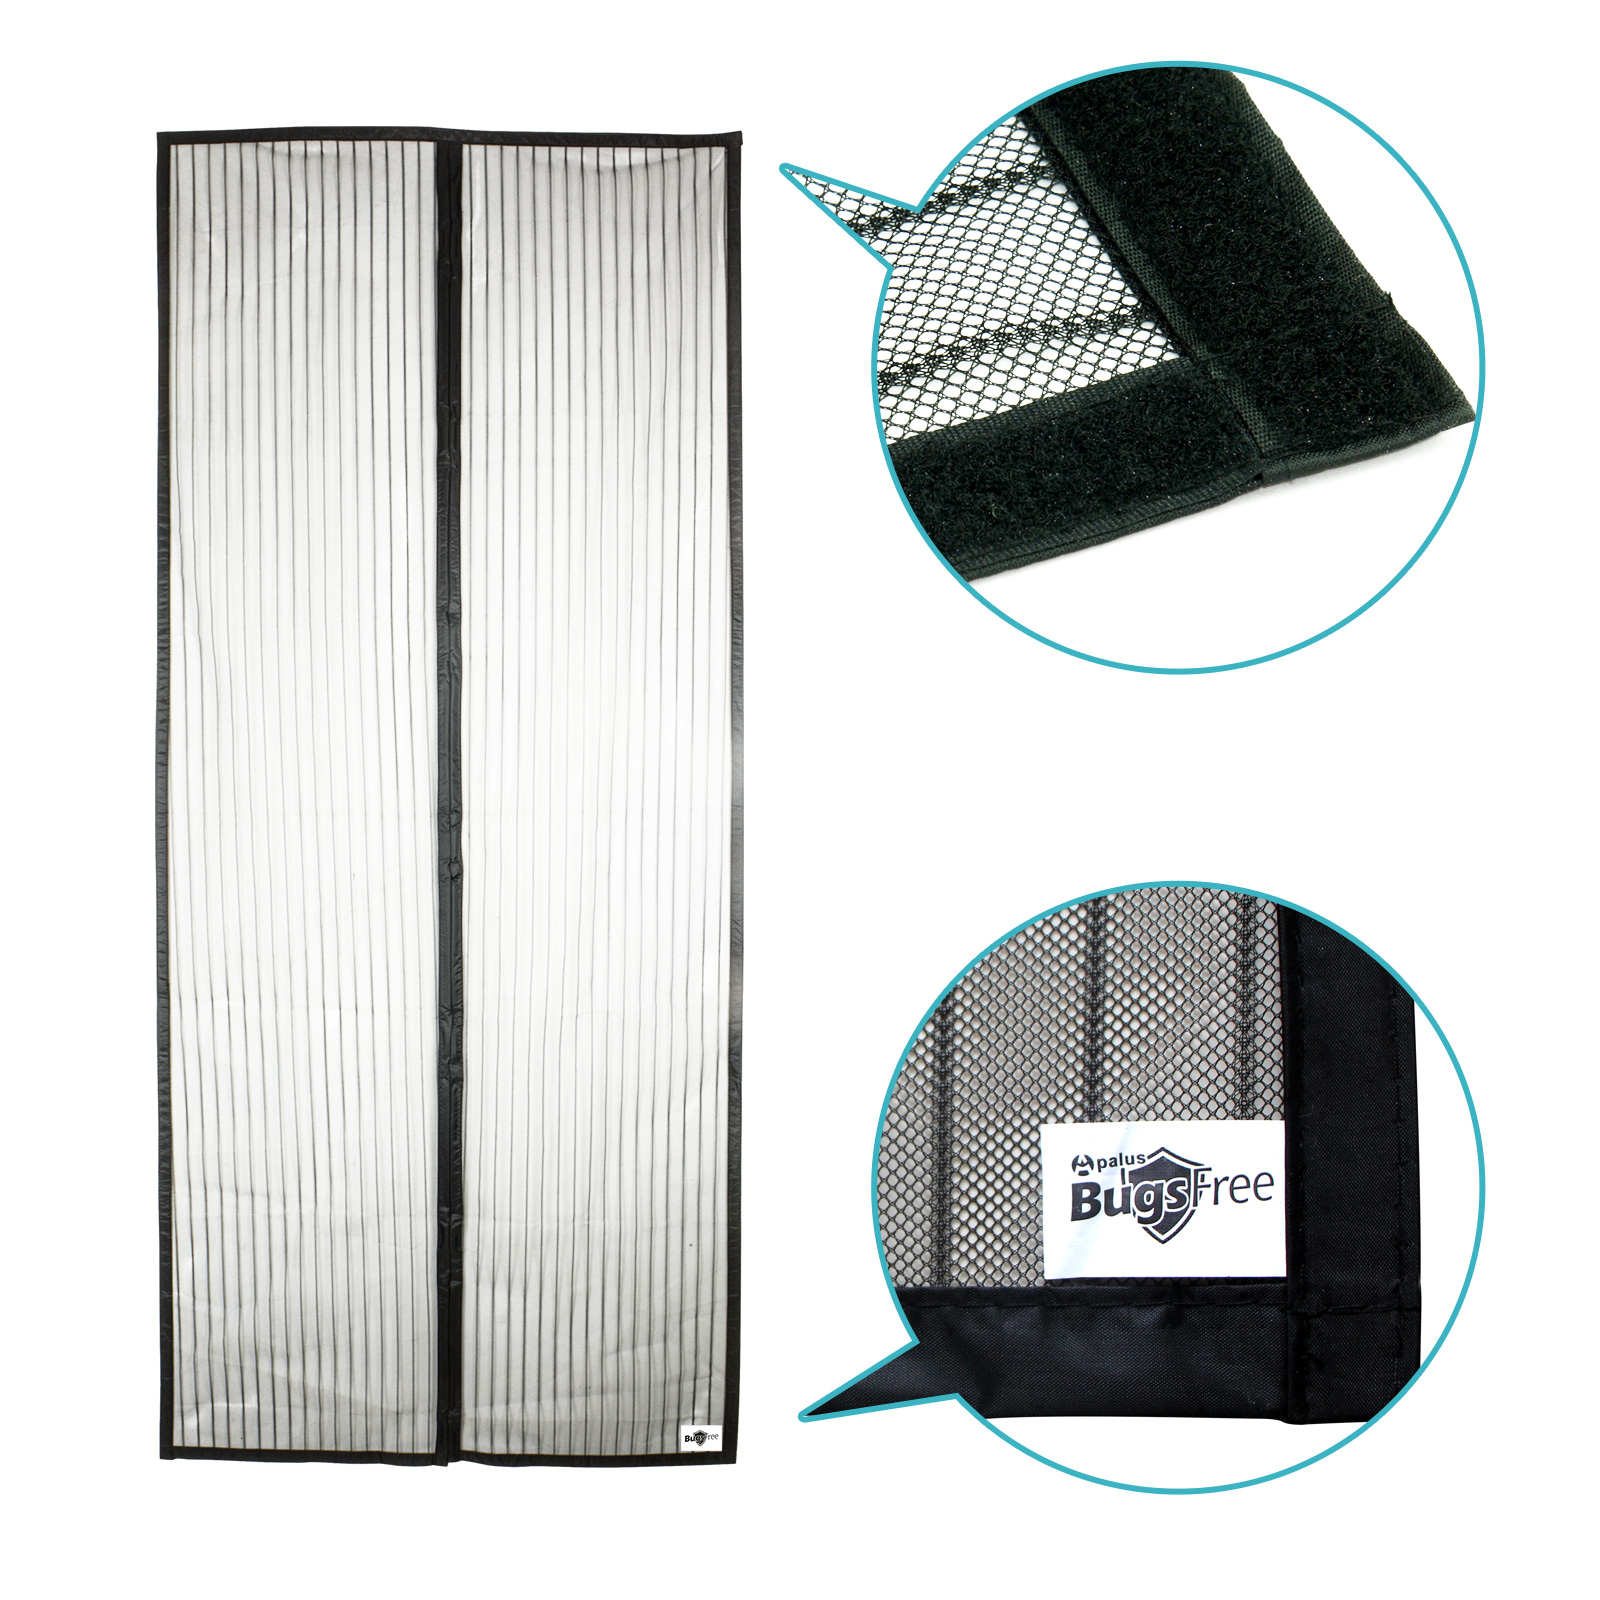 Apalus Magnetic Screen Door, Walk Through Easily, Super Strong Mesh, 28 Magnets From Top to Bottom Ultra Seal Magnets Close Automatically(90x210CM)